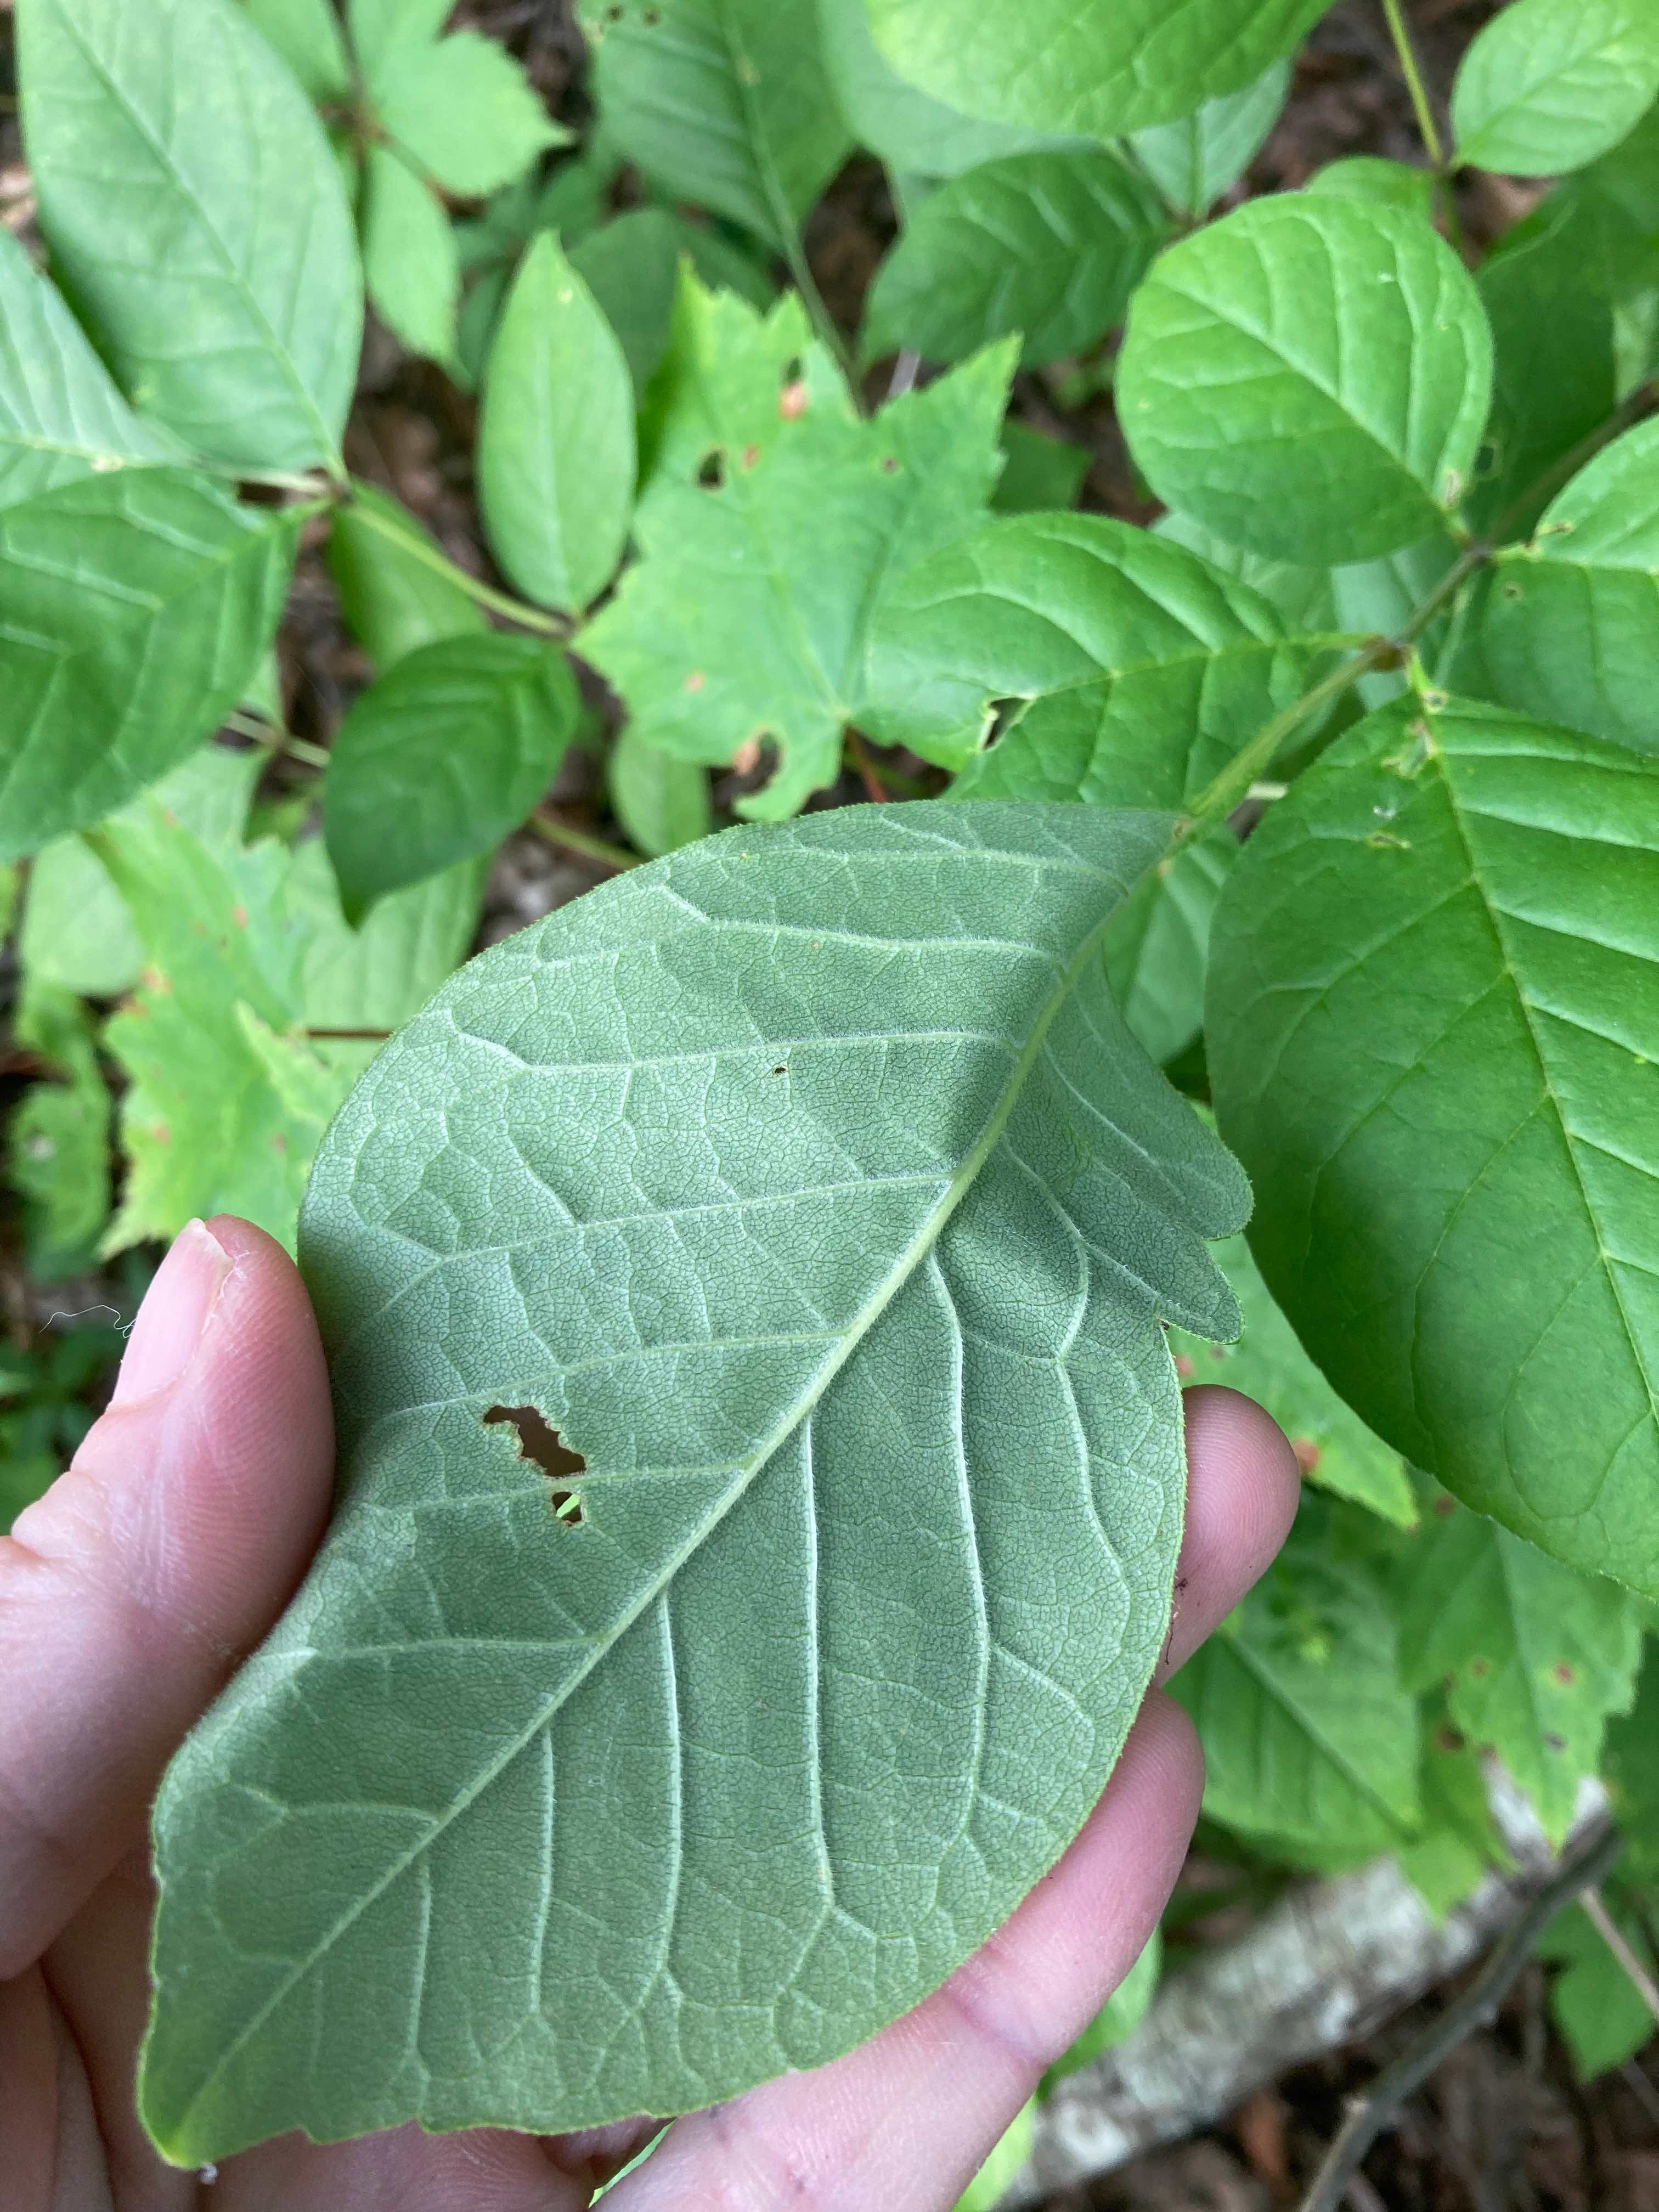 The Scientific Name is Fraxinus americana. You will likely hear them called White Ash, American Ash. This picture shows the  The undersides of leaflets are usually whitened as compared to the medium green tops. of Fraxinus americana